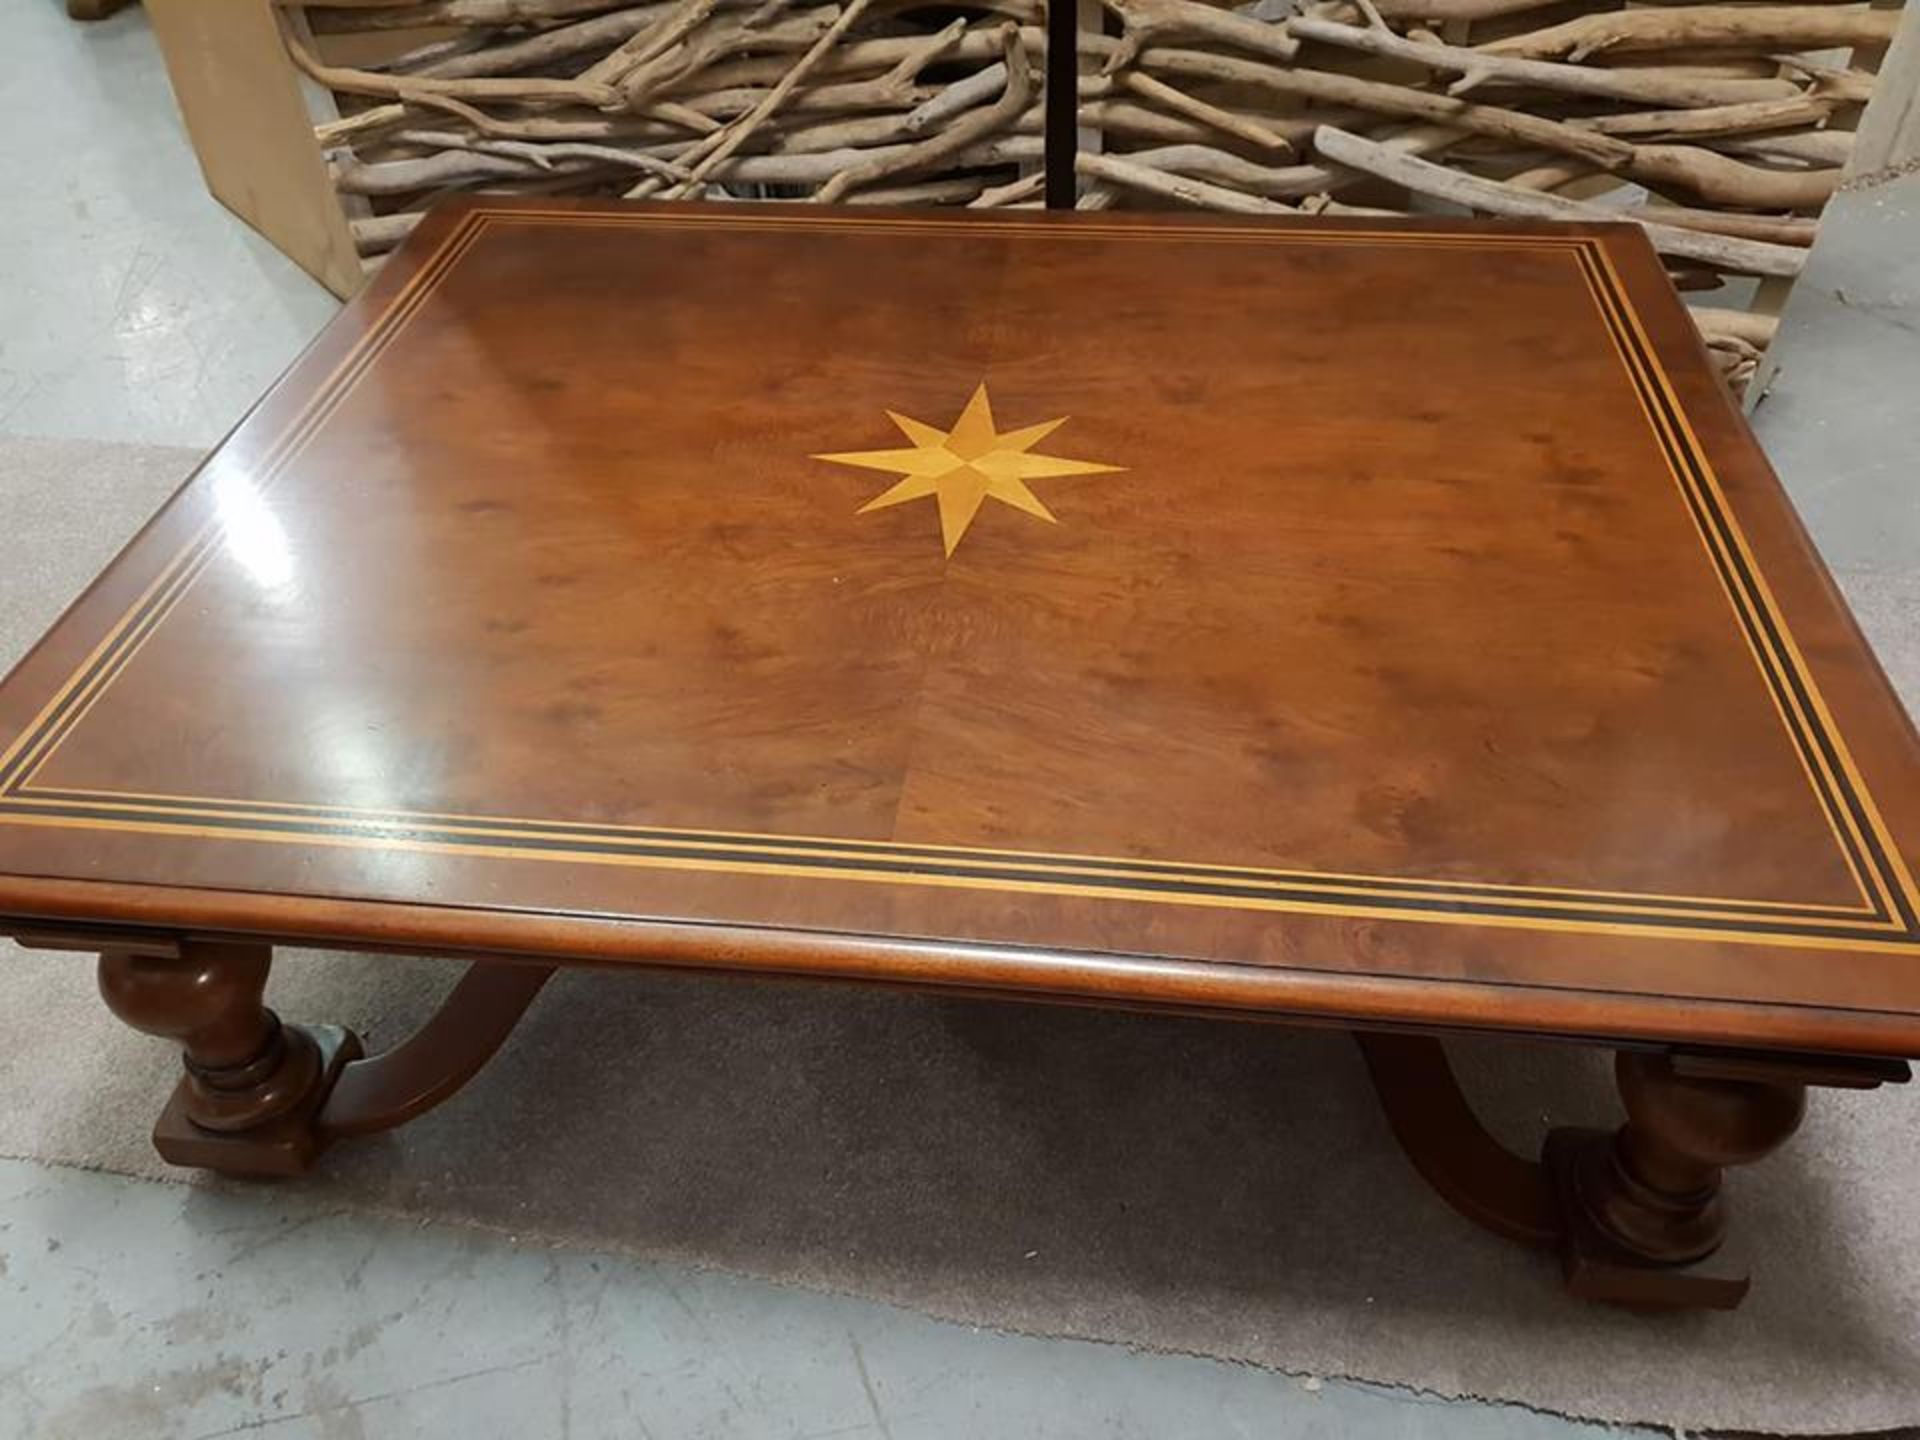 Roland Coffee Table Rosewood With A Satinwood Marquetry Inlay Carton Dimension 138 X 169 X 64cm MSRP